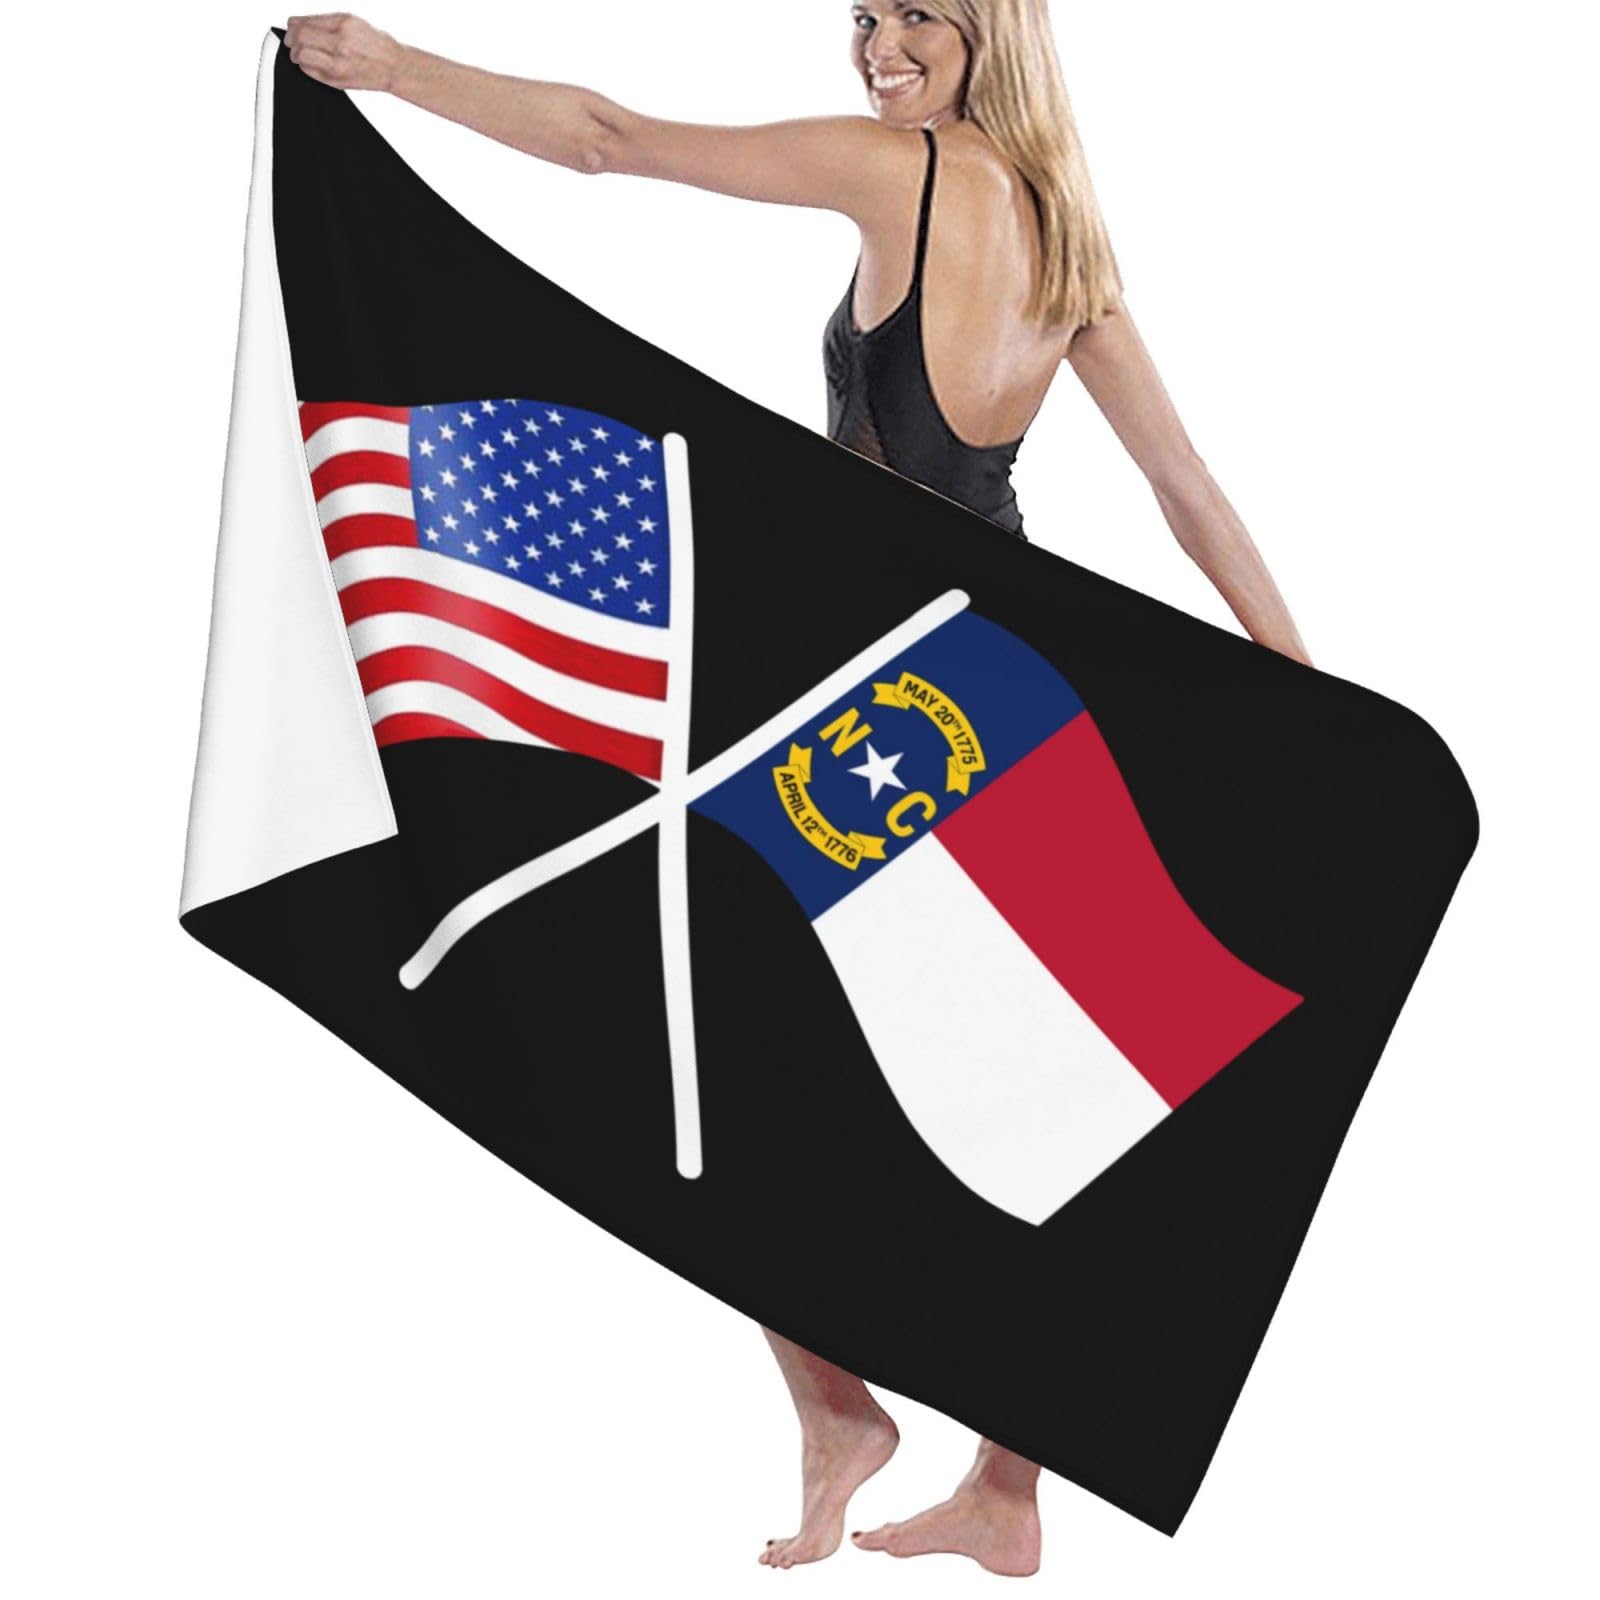 ADOSIA American and North Carolina Flag Beach Towel 32x52in Oversized Soft Absorbent Beach Towel